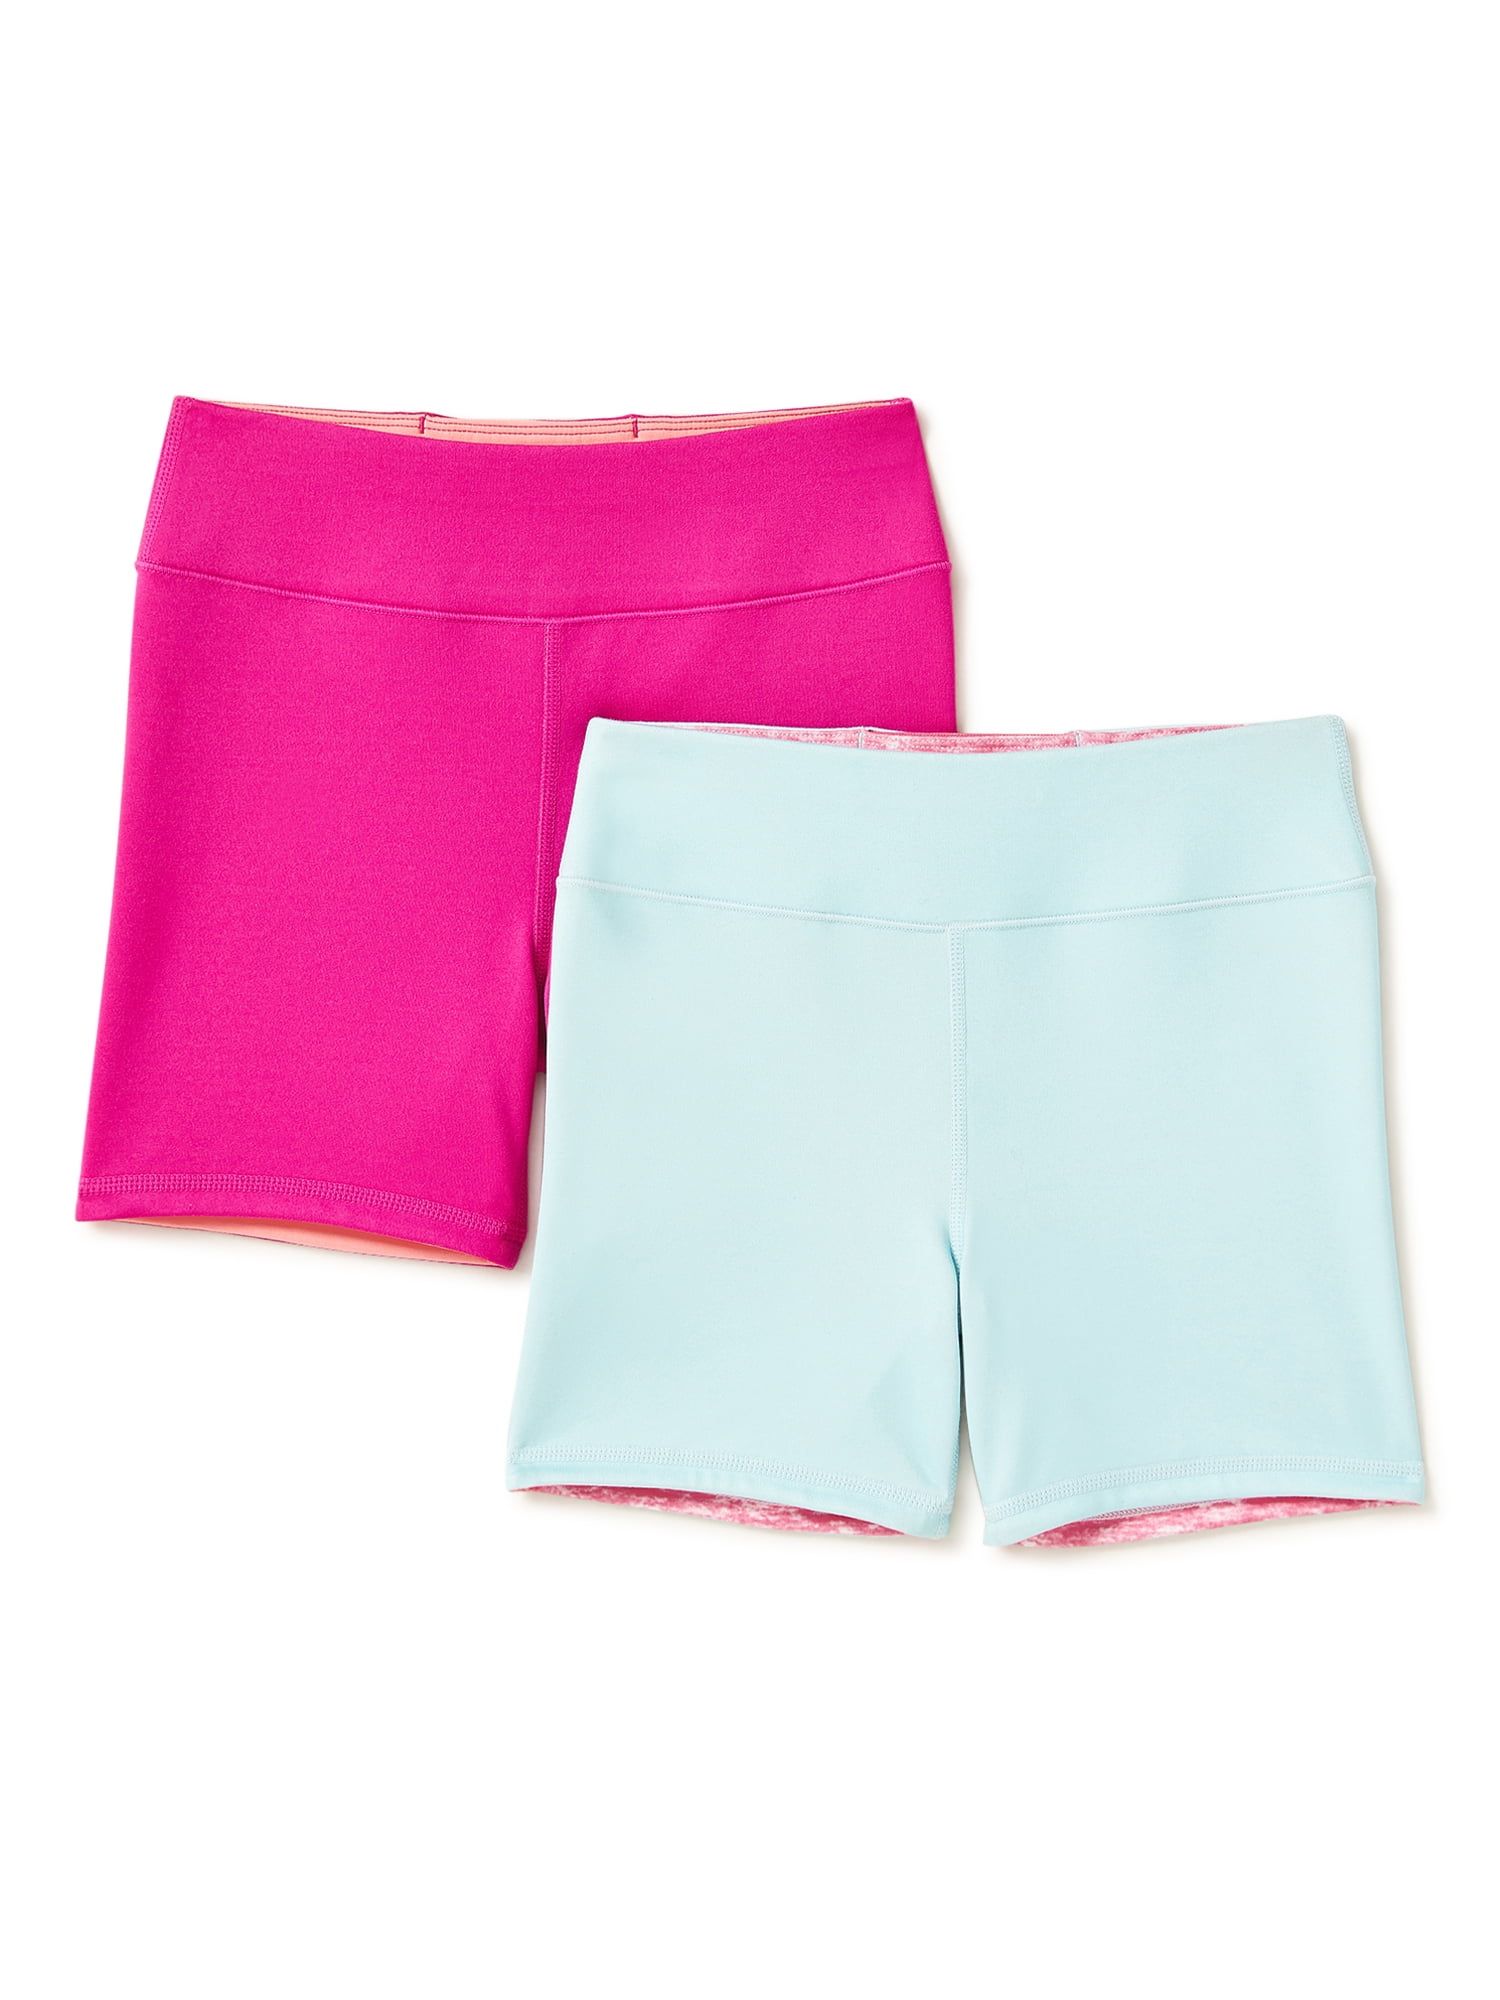 Avia Girls' Sport Shorts with Liner, 2-Pack, Sizes 4-18 & Plus